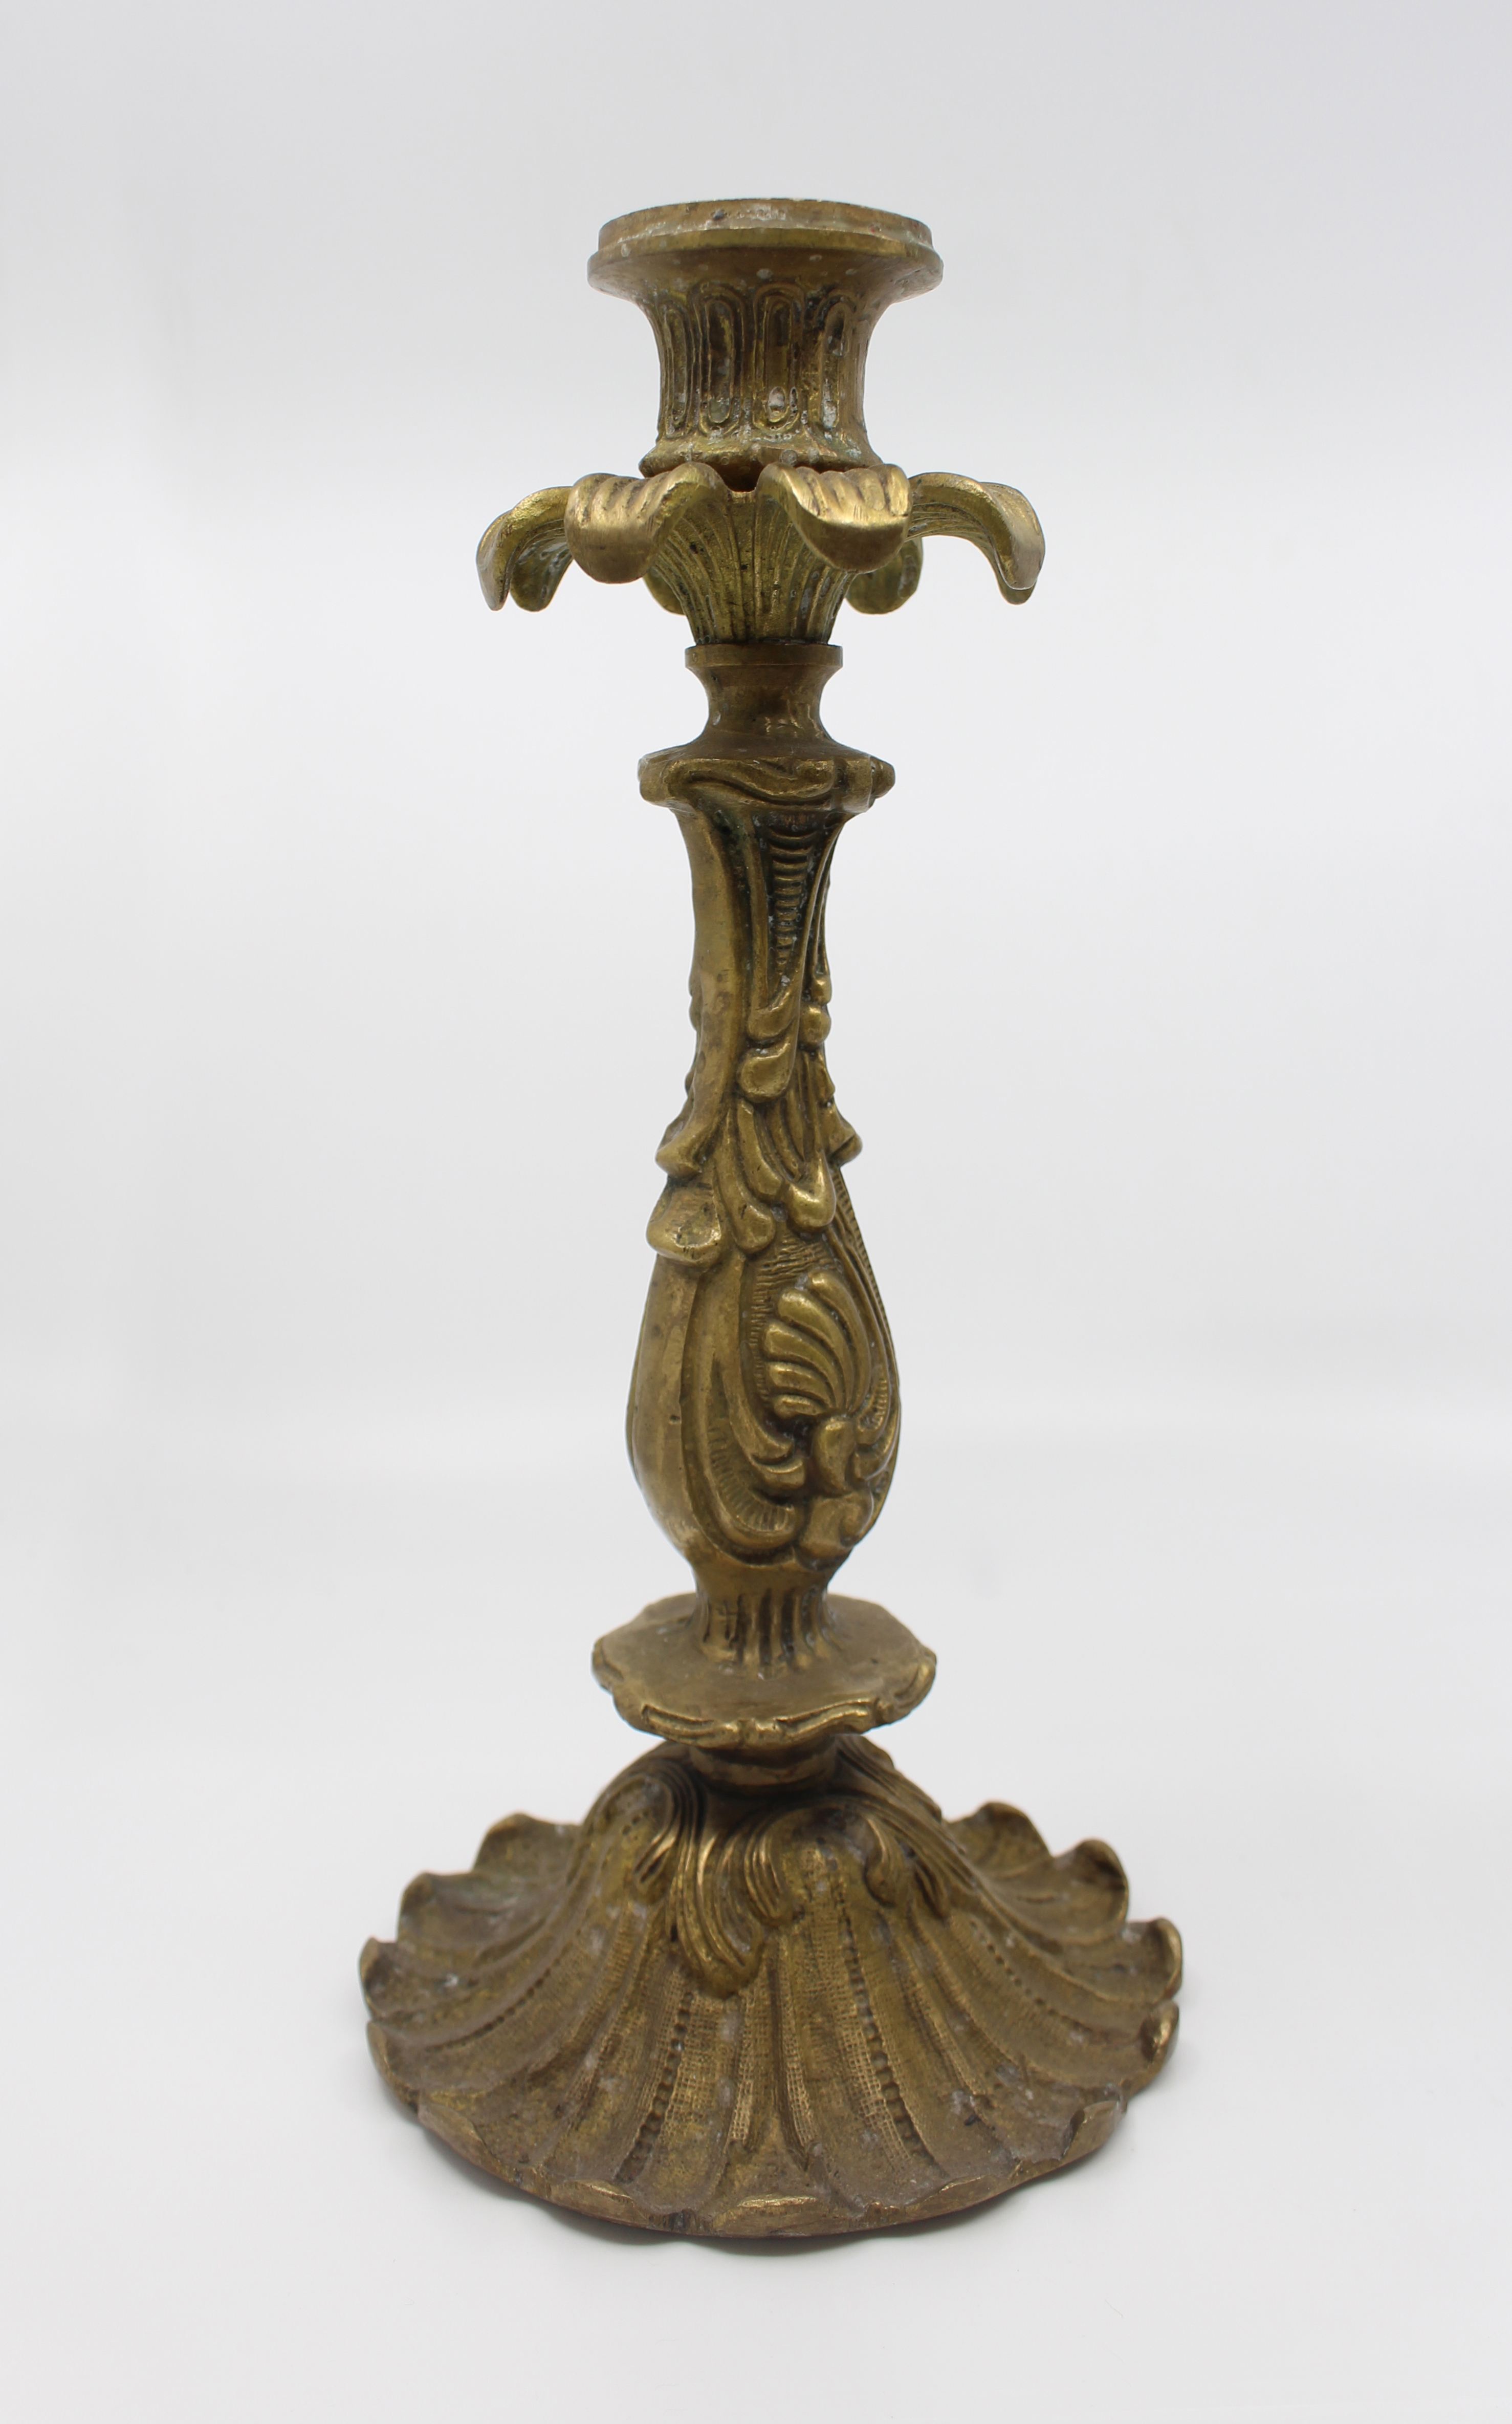 Pair of Heavy Vintage Decorative Brass Candlesticks - Image 4 of 8